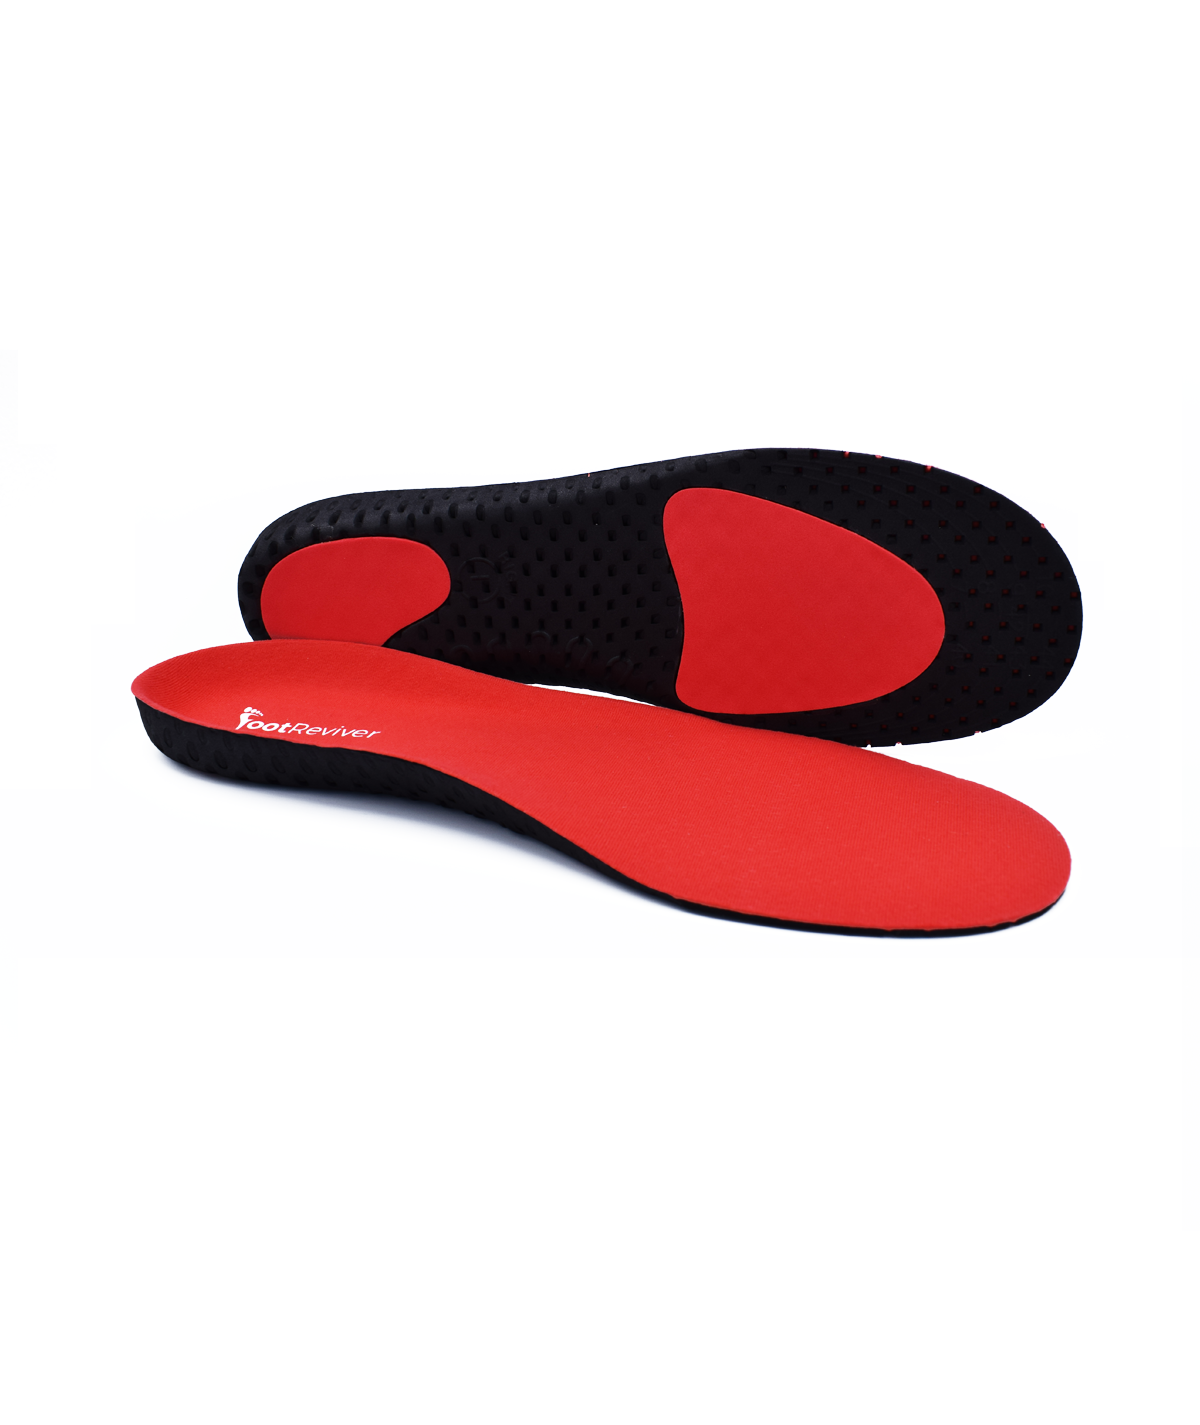 Foot pain insoles by FootReviver™ - Nuova Health